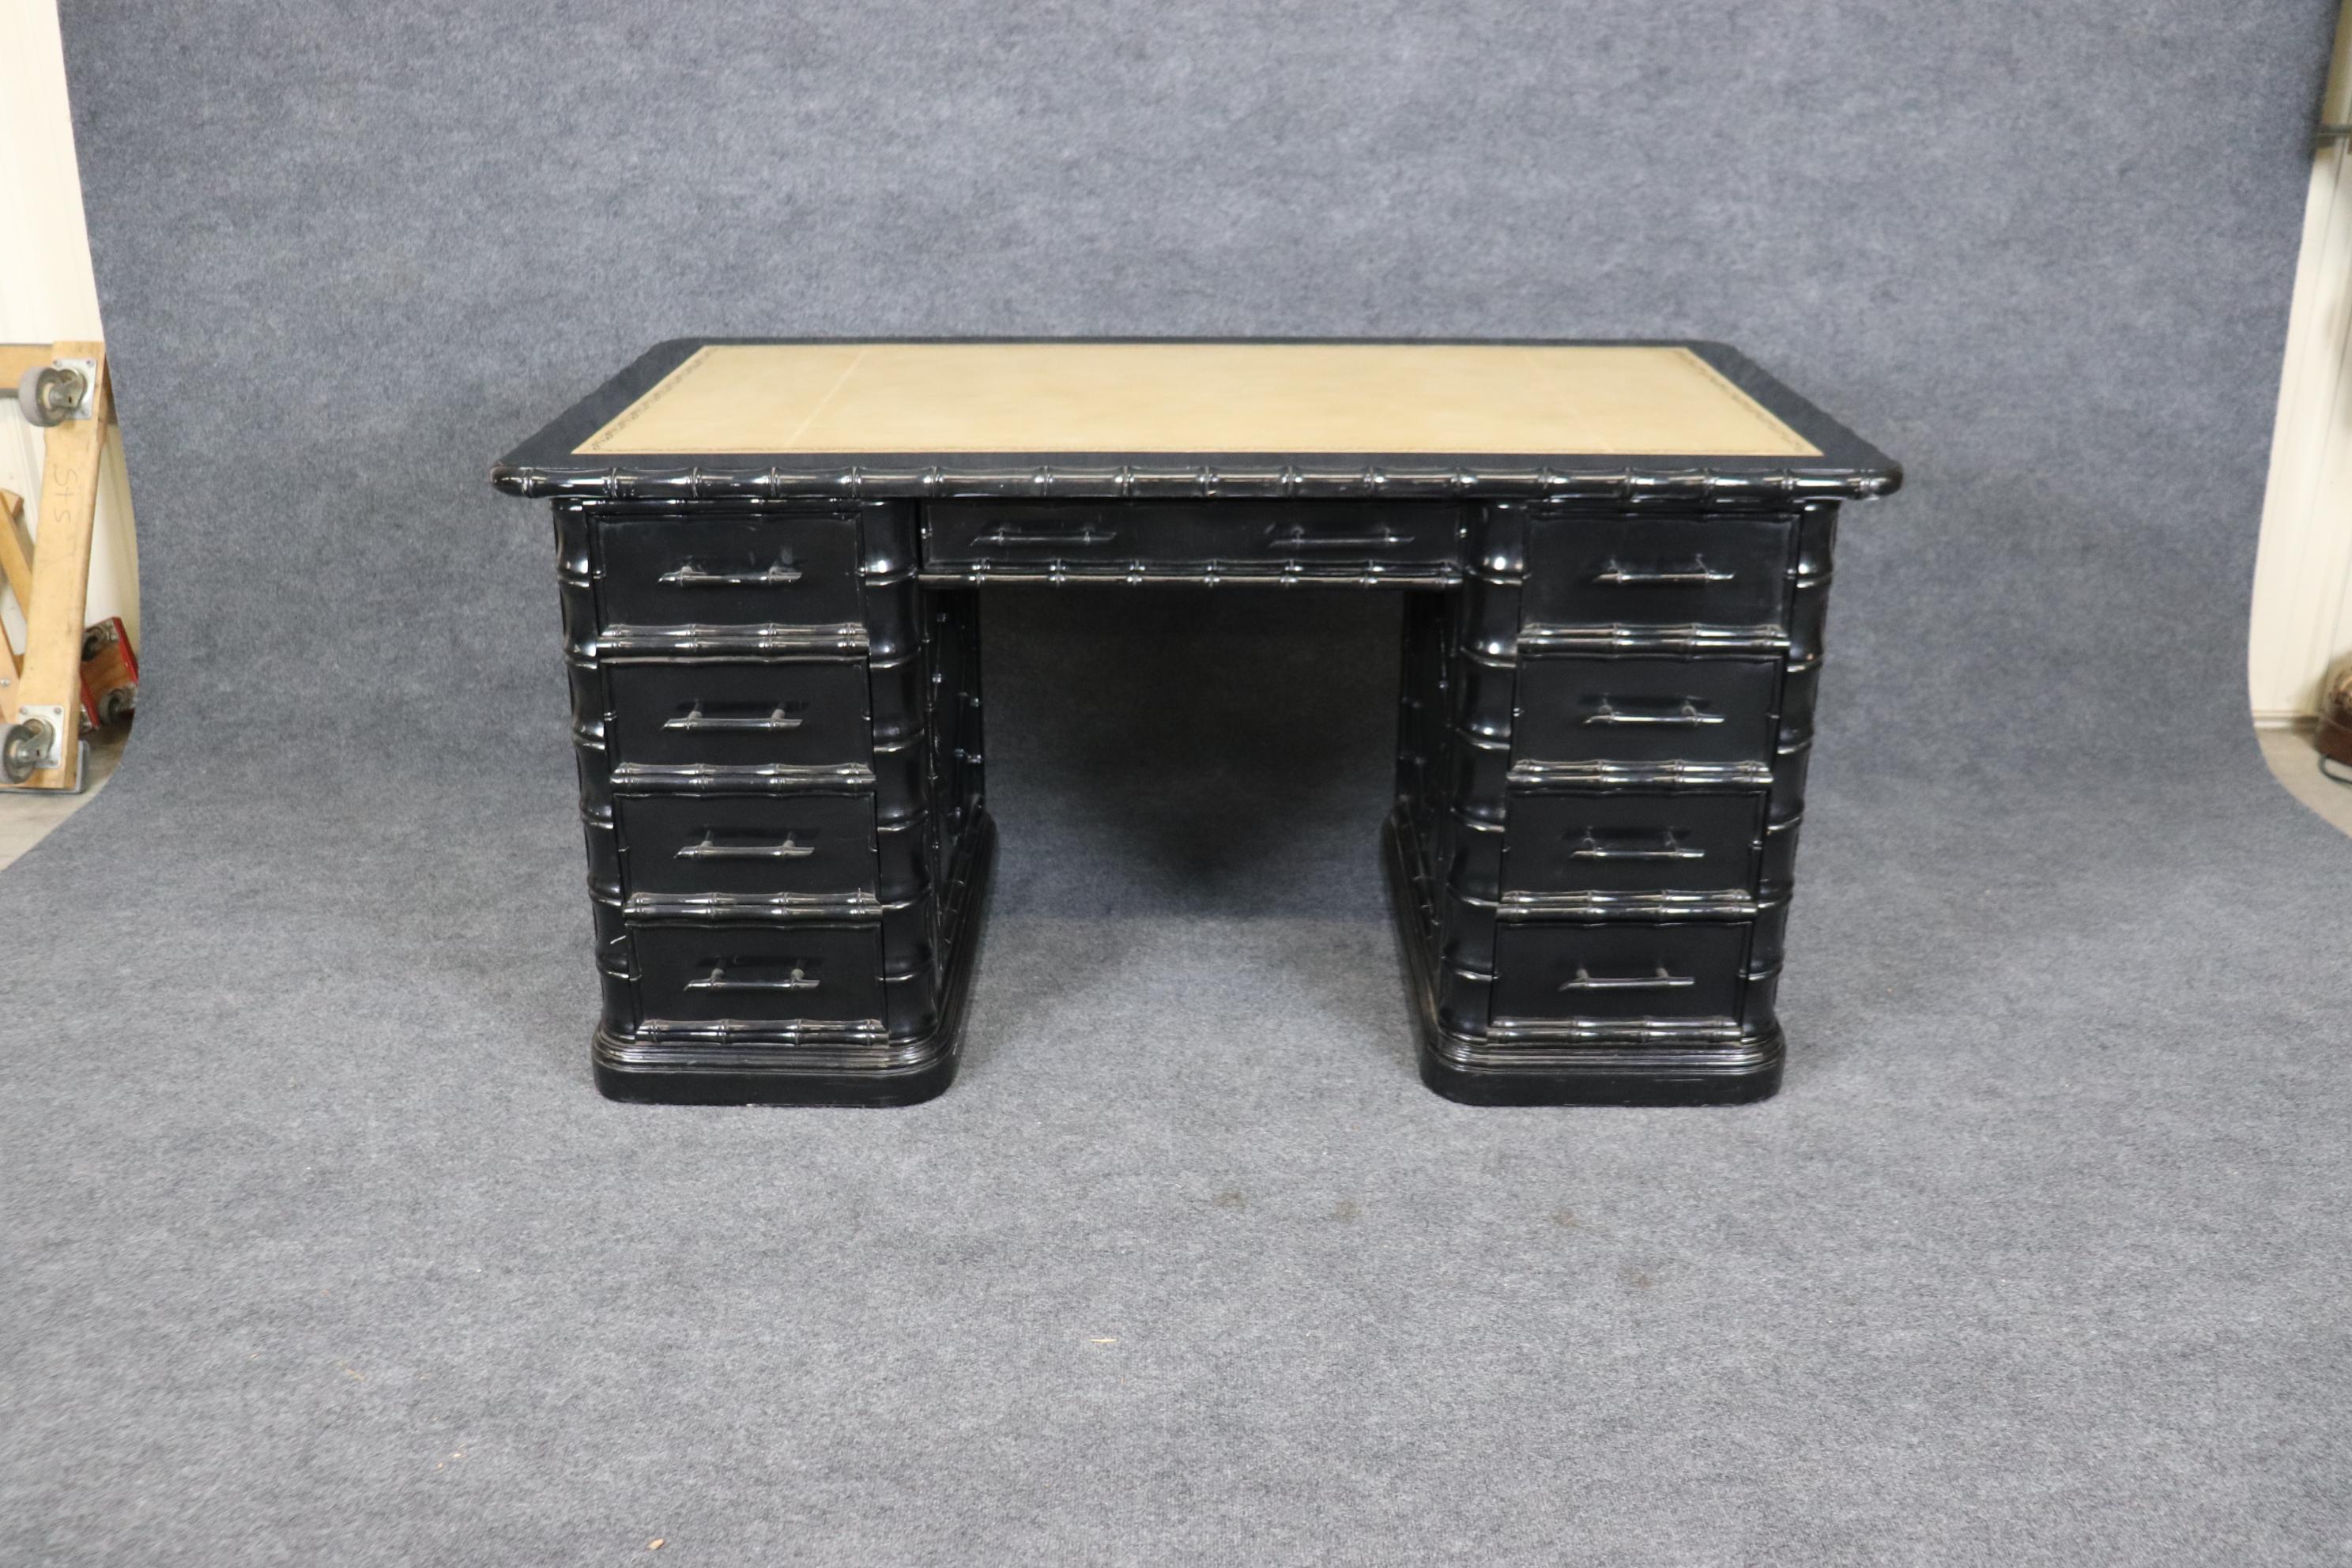 This is a beautiful cabinet-made faux bambook desk in the French or Campaign style. The desk features a fine off-white leather top with gold embossing. The desk comes apart in three pieces. The desk has a nice original black lacquer finish. Measures